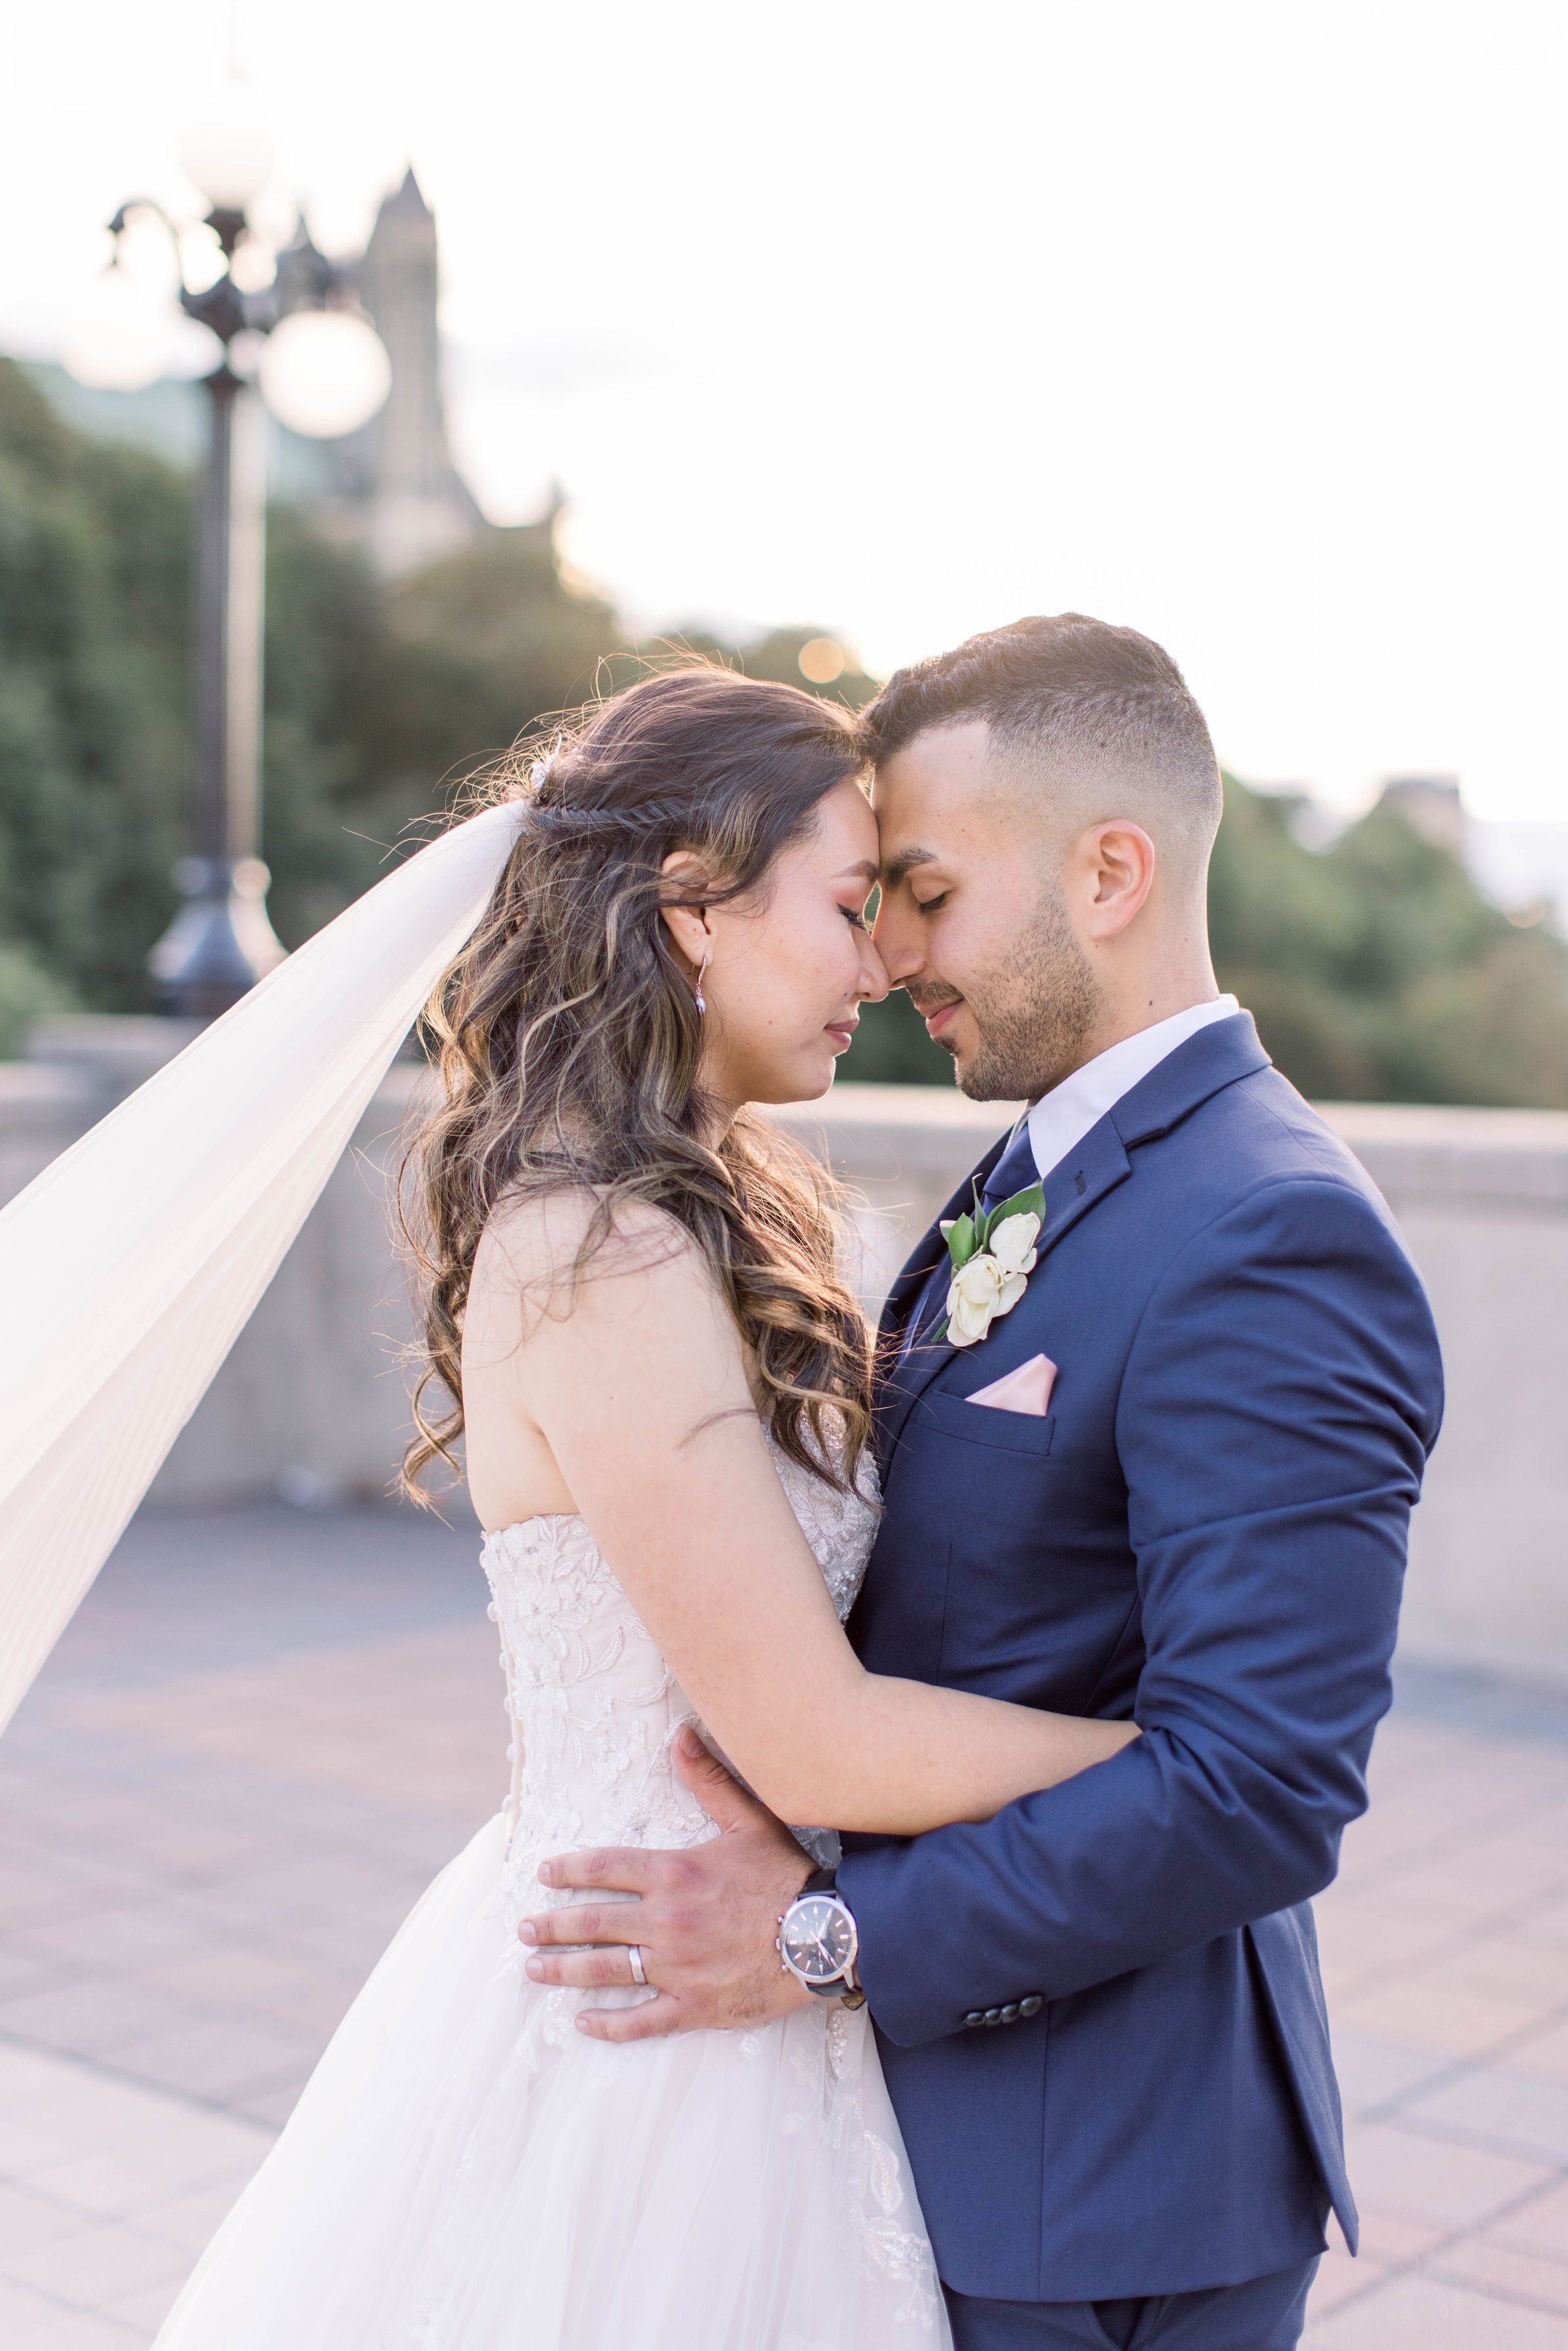  In Ottawa, a bride and groom close their eyes and put foreheads together by Chelsea Mason Photography. veil foreheads together #ChelseaMasonPhotography #ChelseaMasonWeddings #DowntownOttawa #FairmontChateauLaurier #OttawaWeddings #OttawaPhotographer